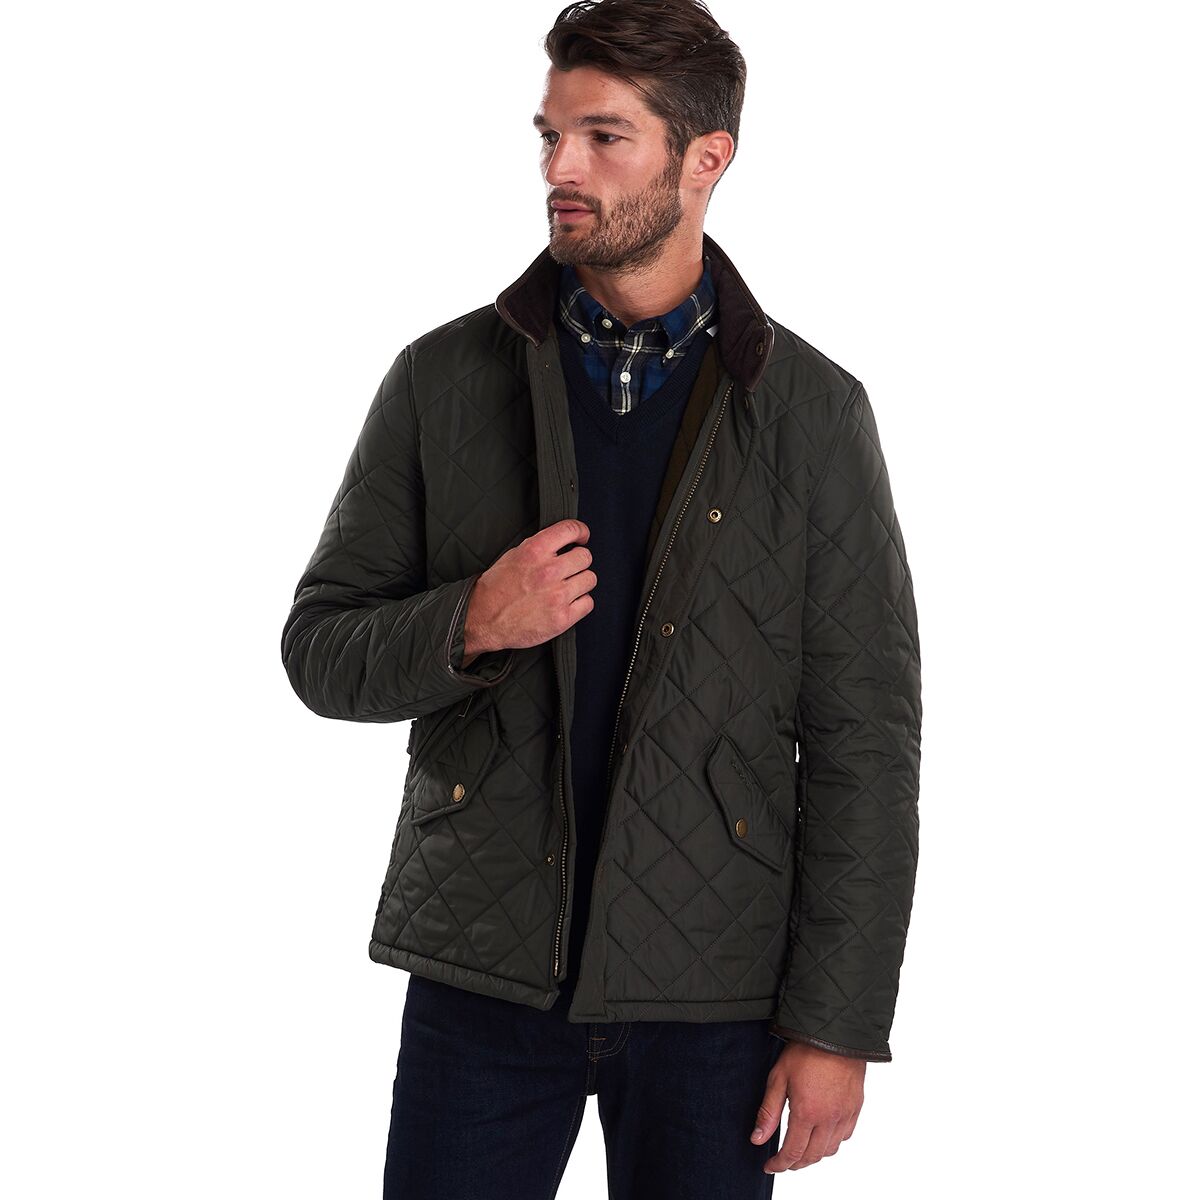 Powell Quilted Jacket - Men